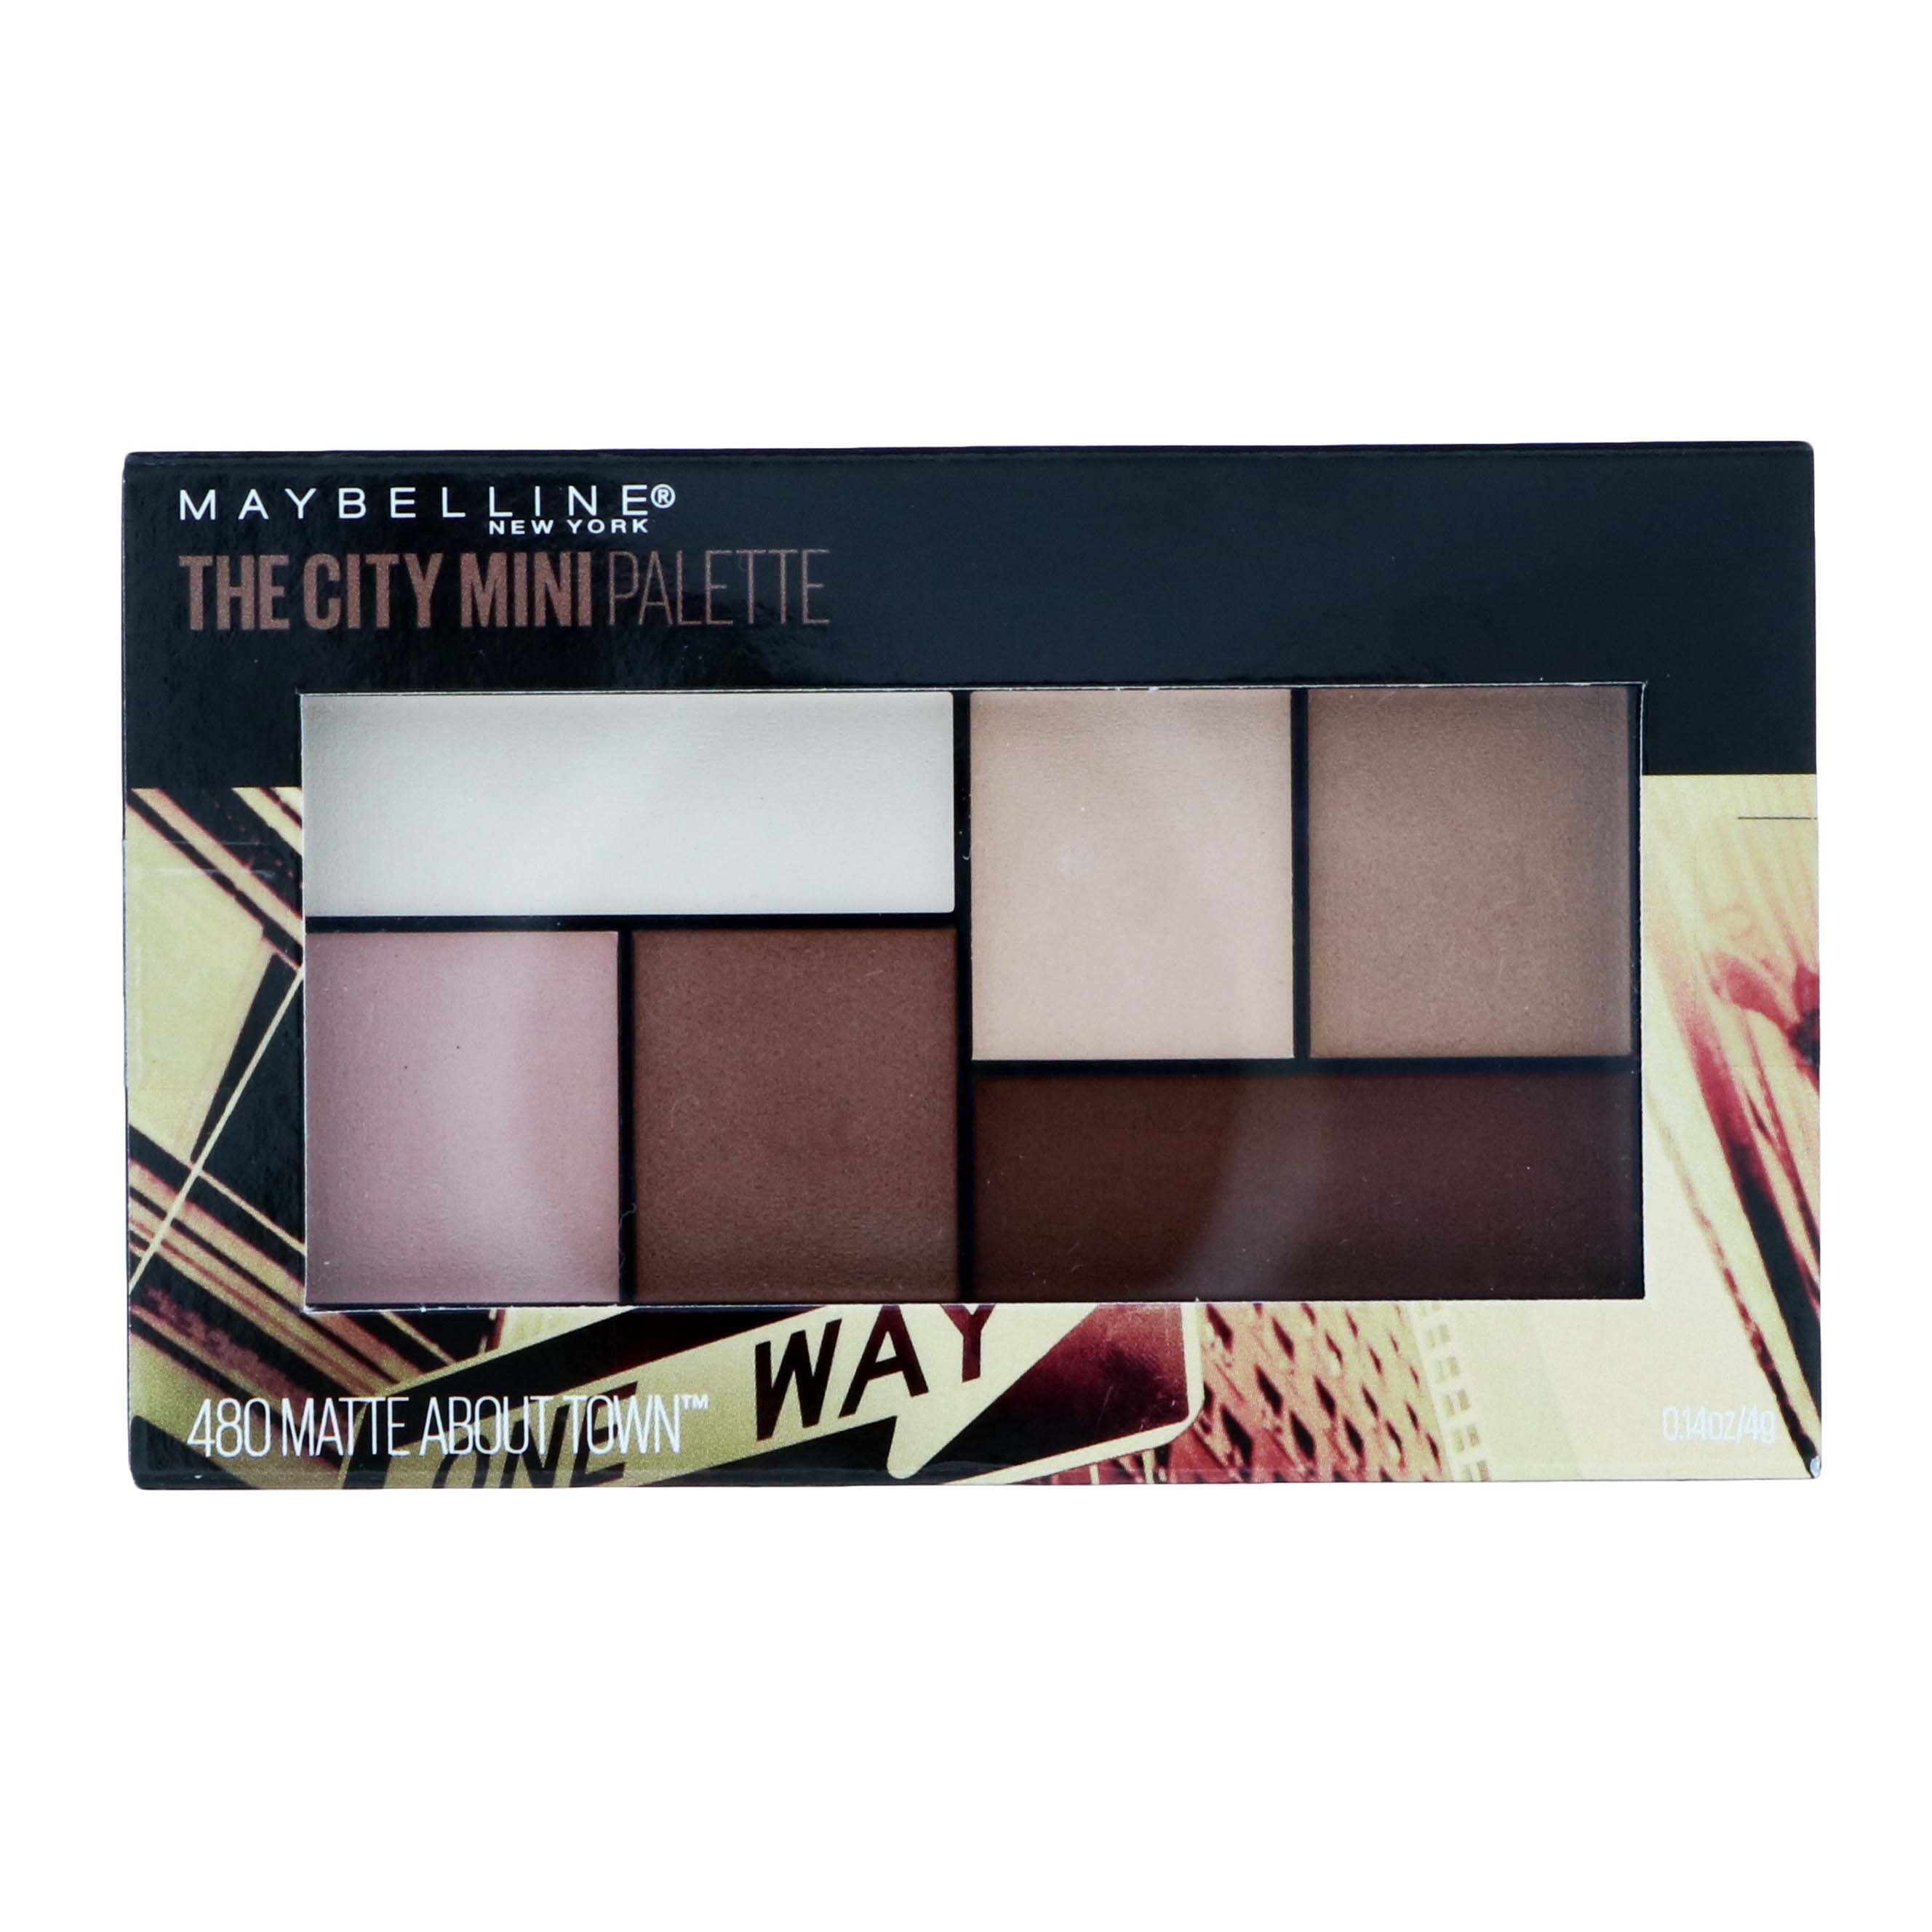 Maybelline The City Mini Eyeshadow Shop H-E-B - Eyeshadow at Town Palette, Matte About